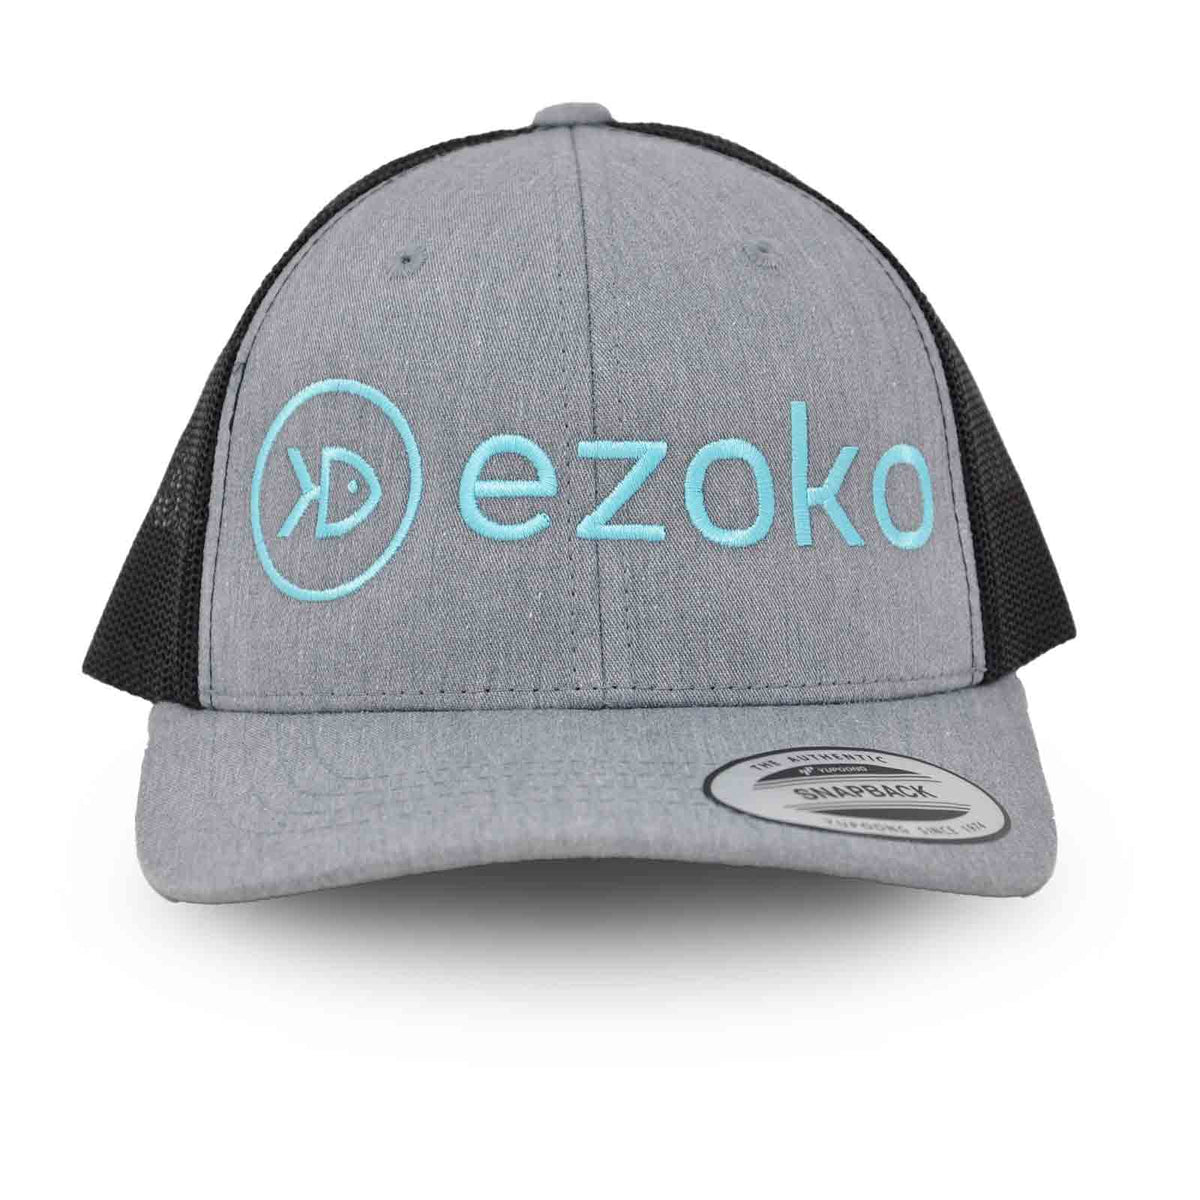 View of Ezoko Youth Retro Trucker Heather Grey/Black Blue available at EZOKO Pike and Musky Shop